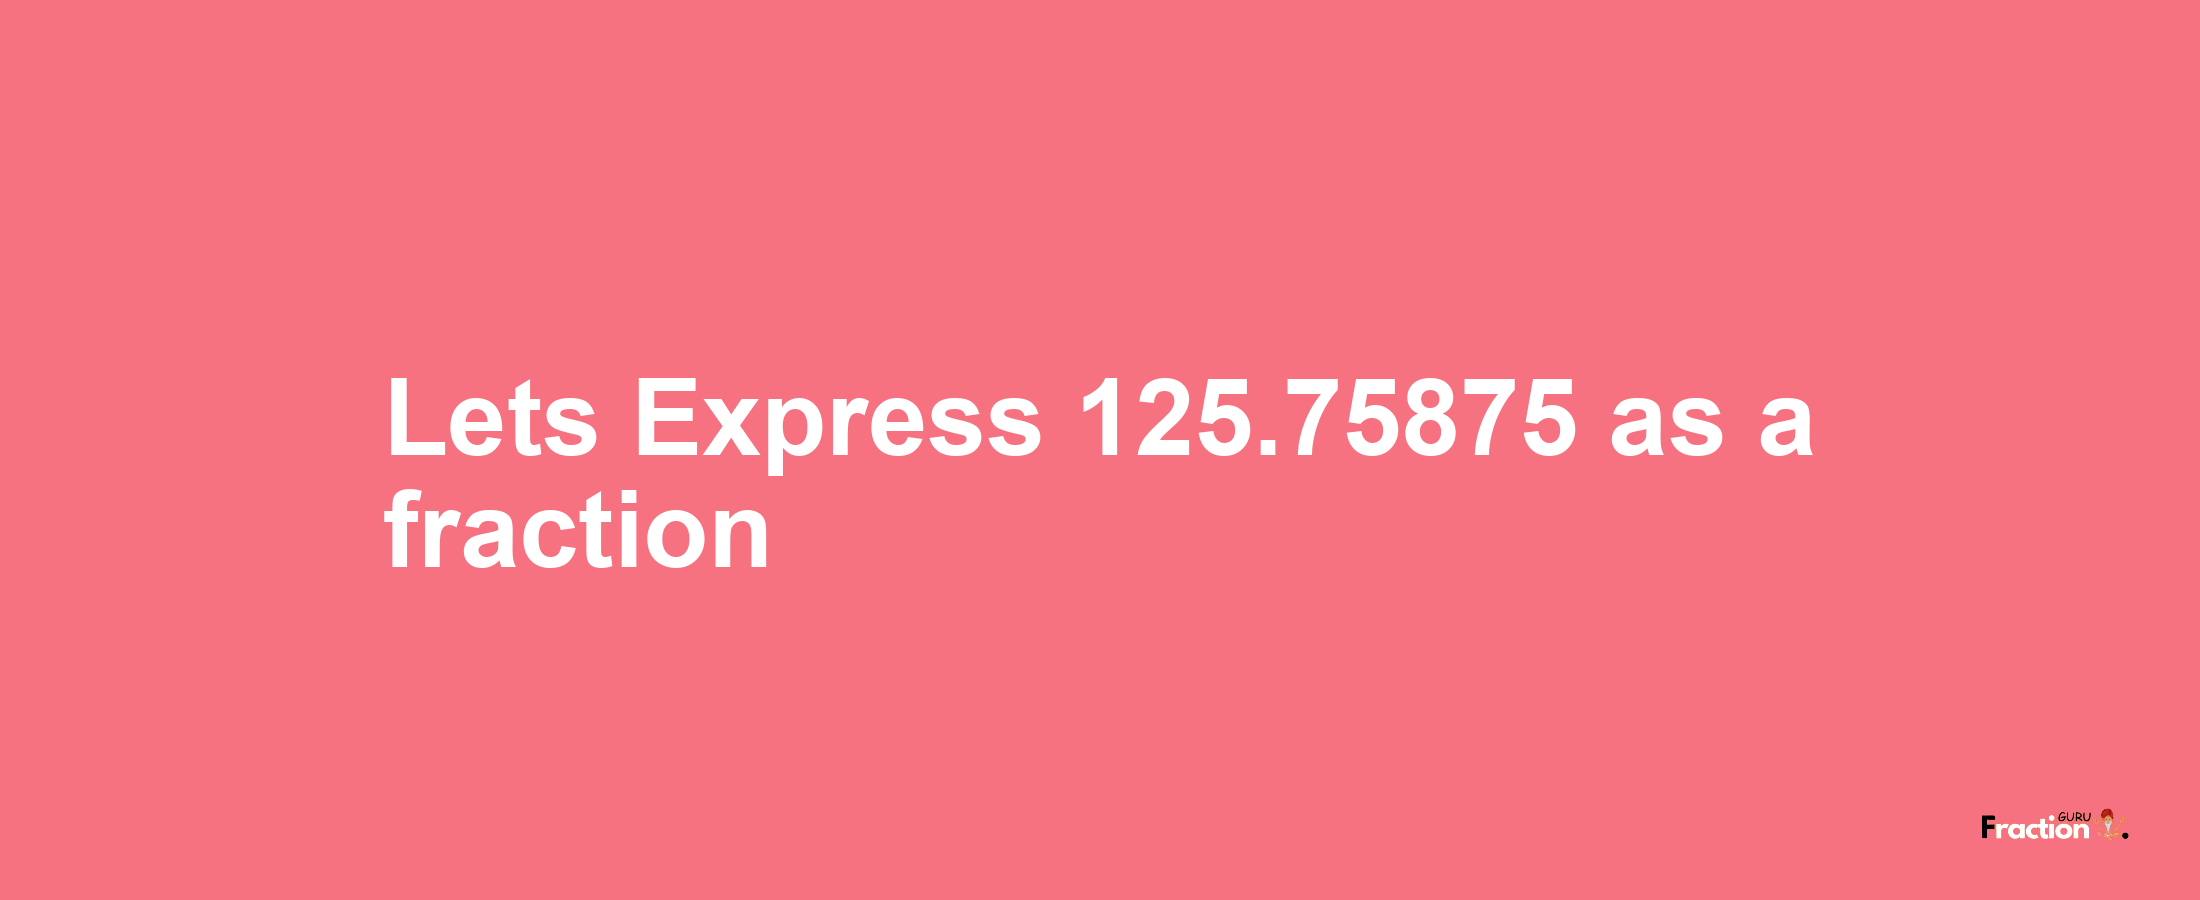 Lets Express 125.75875 as afraction